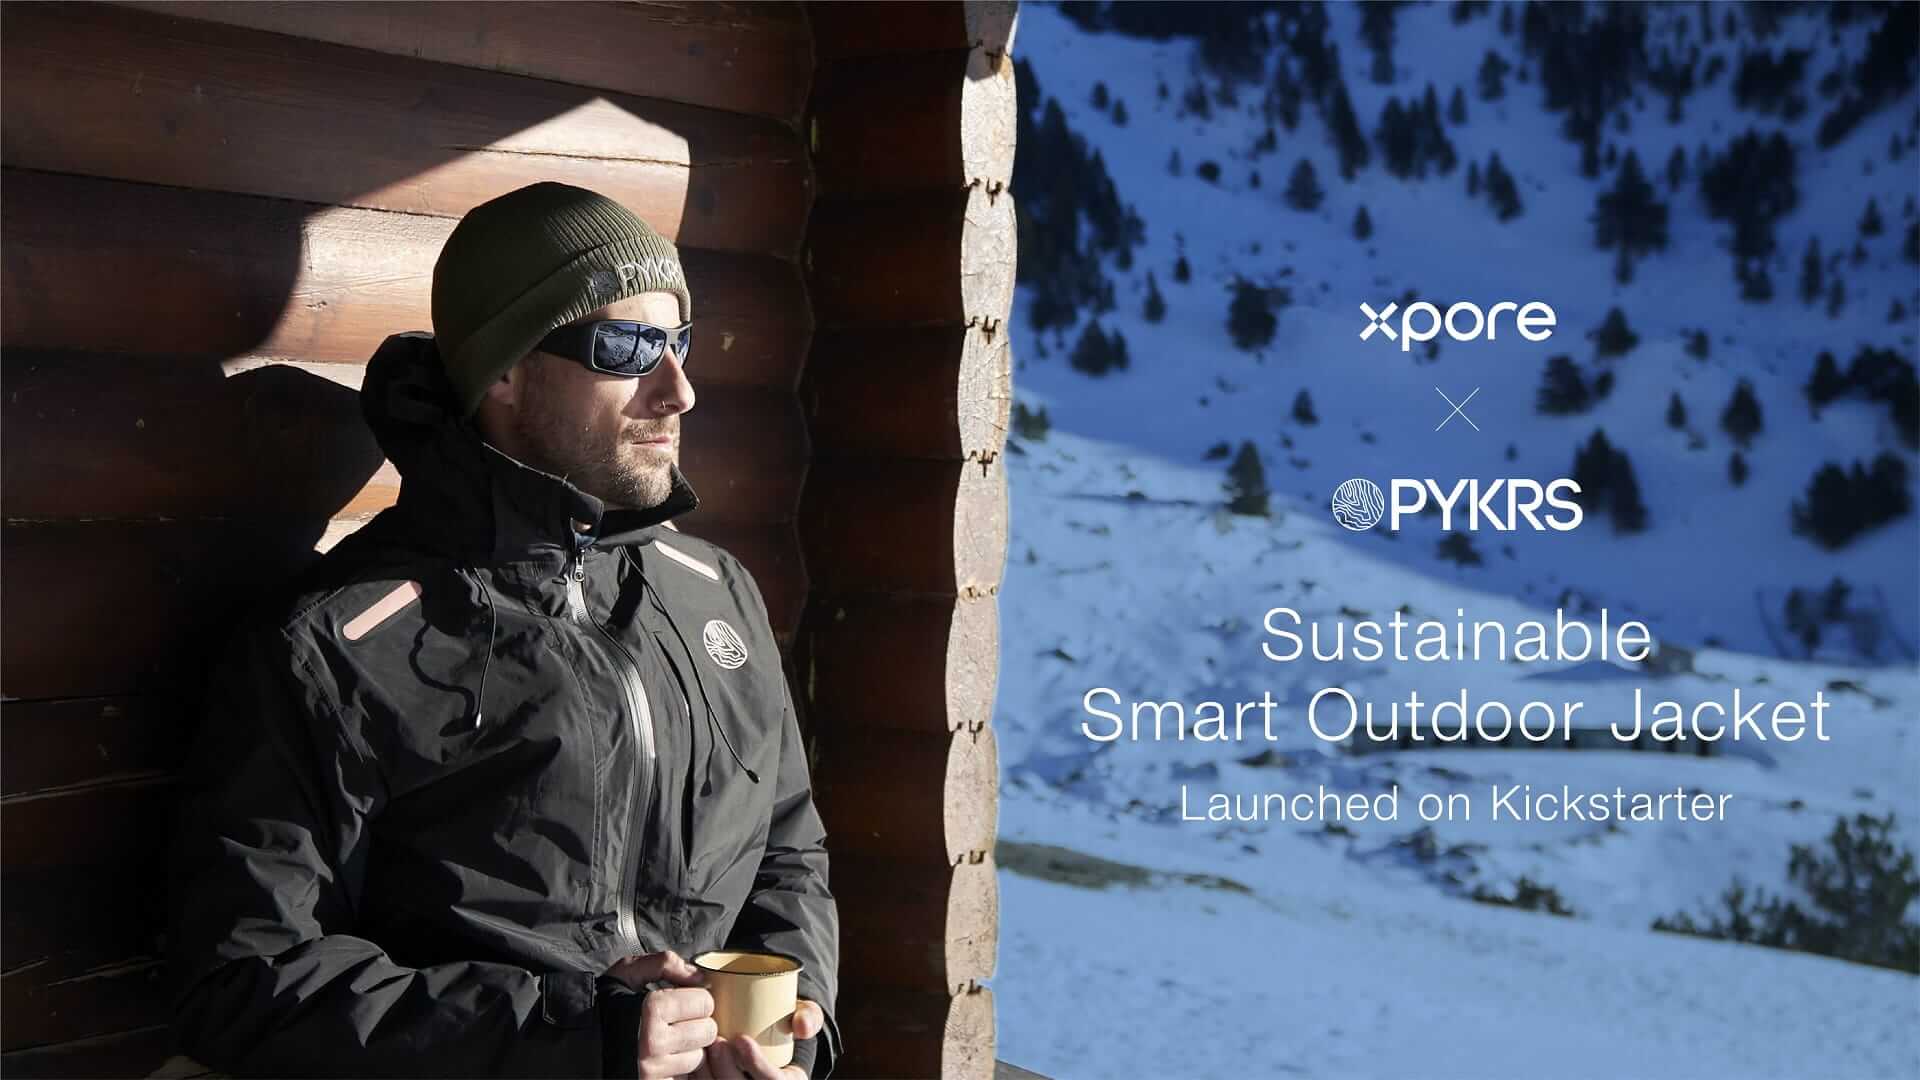 PYKRS x Xpore: Sustainable Smart Outdoor Jacket Launched on Kickstarter